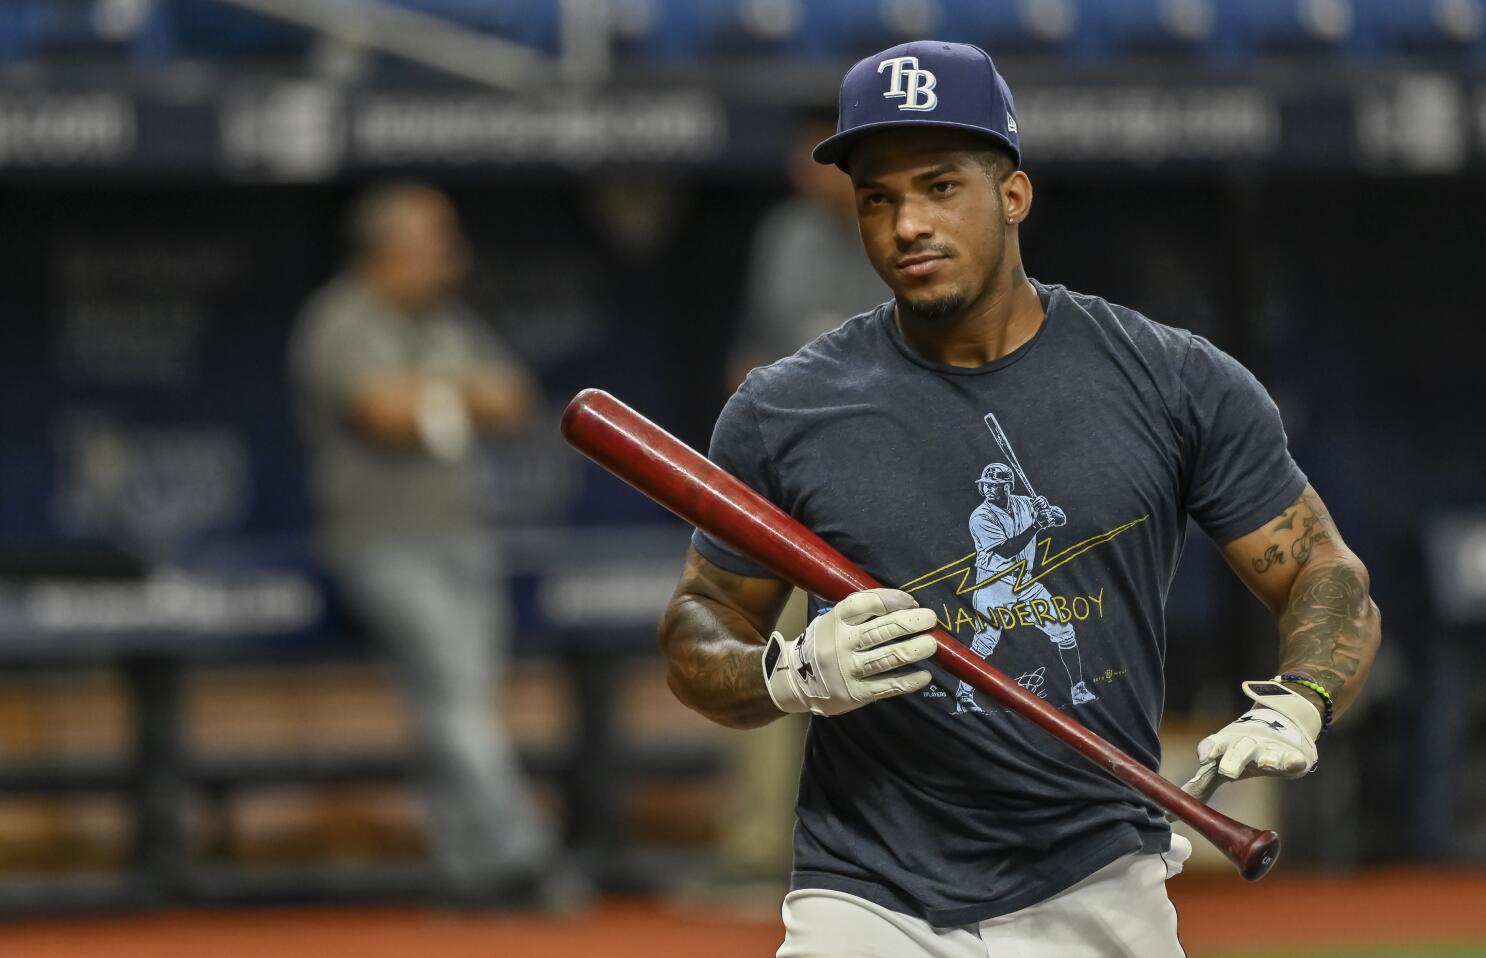 When Will Wander Franco Be Back, Return To Rays? Injury Update